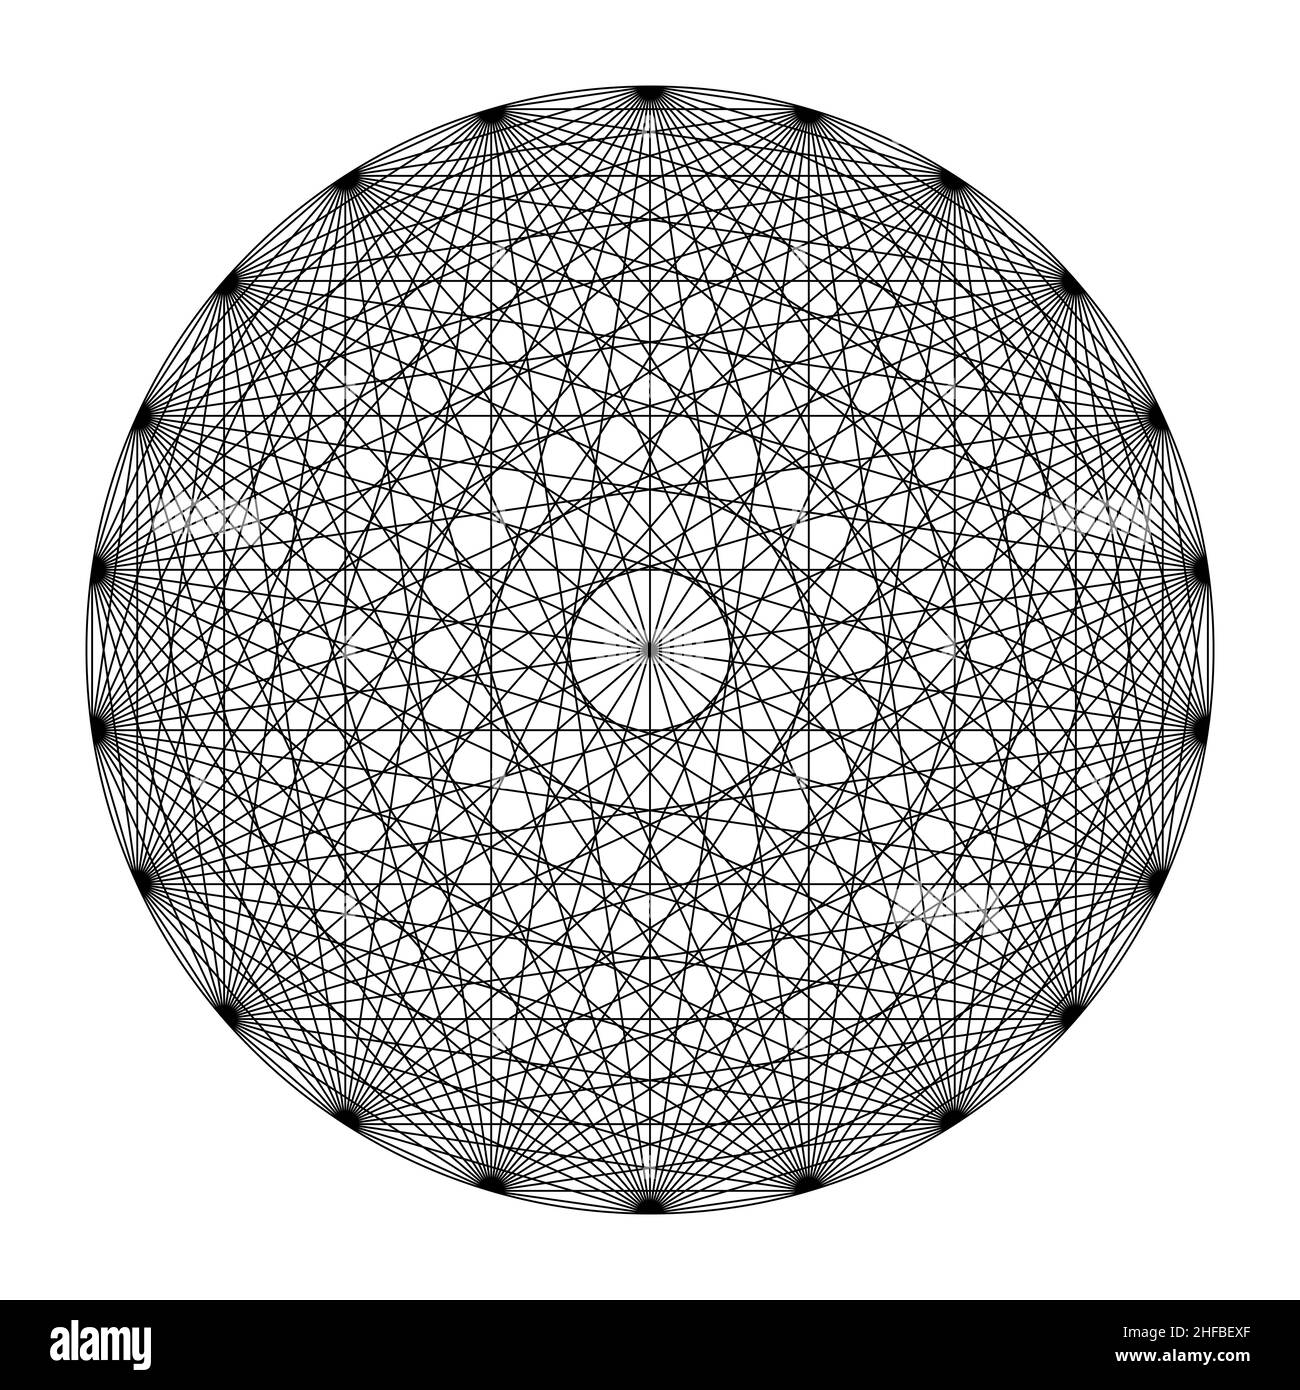 Circle with twenty-two points, all connected with lines, showing a mandala like symmetry. Sacred Geometry according to the 231 doorways of G. Postel. Stock Photo